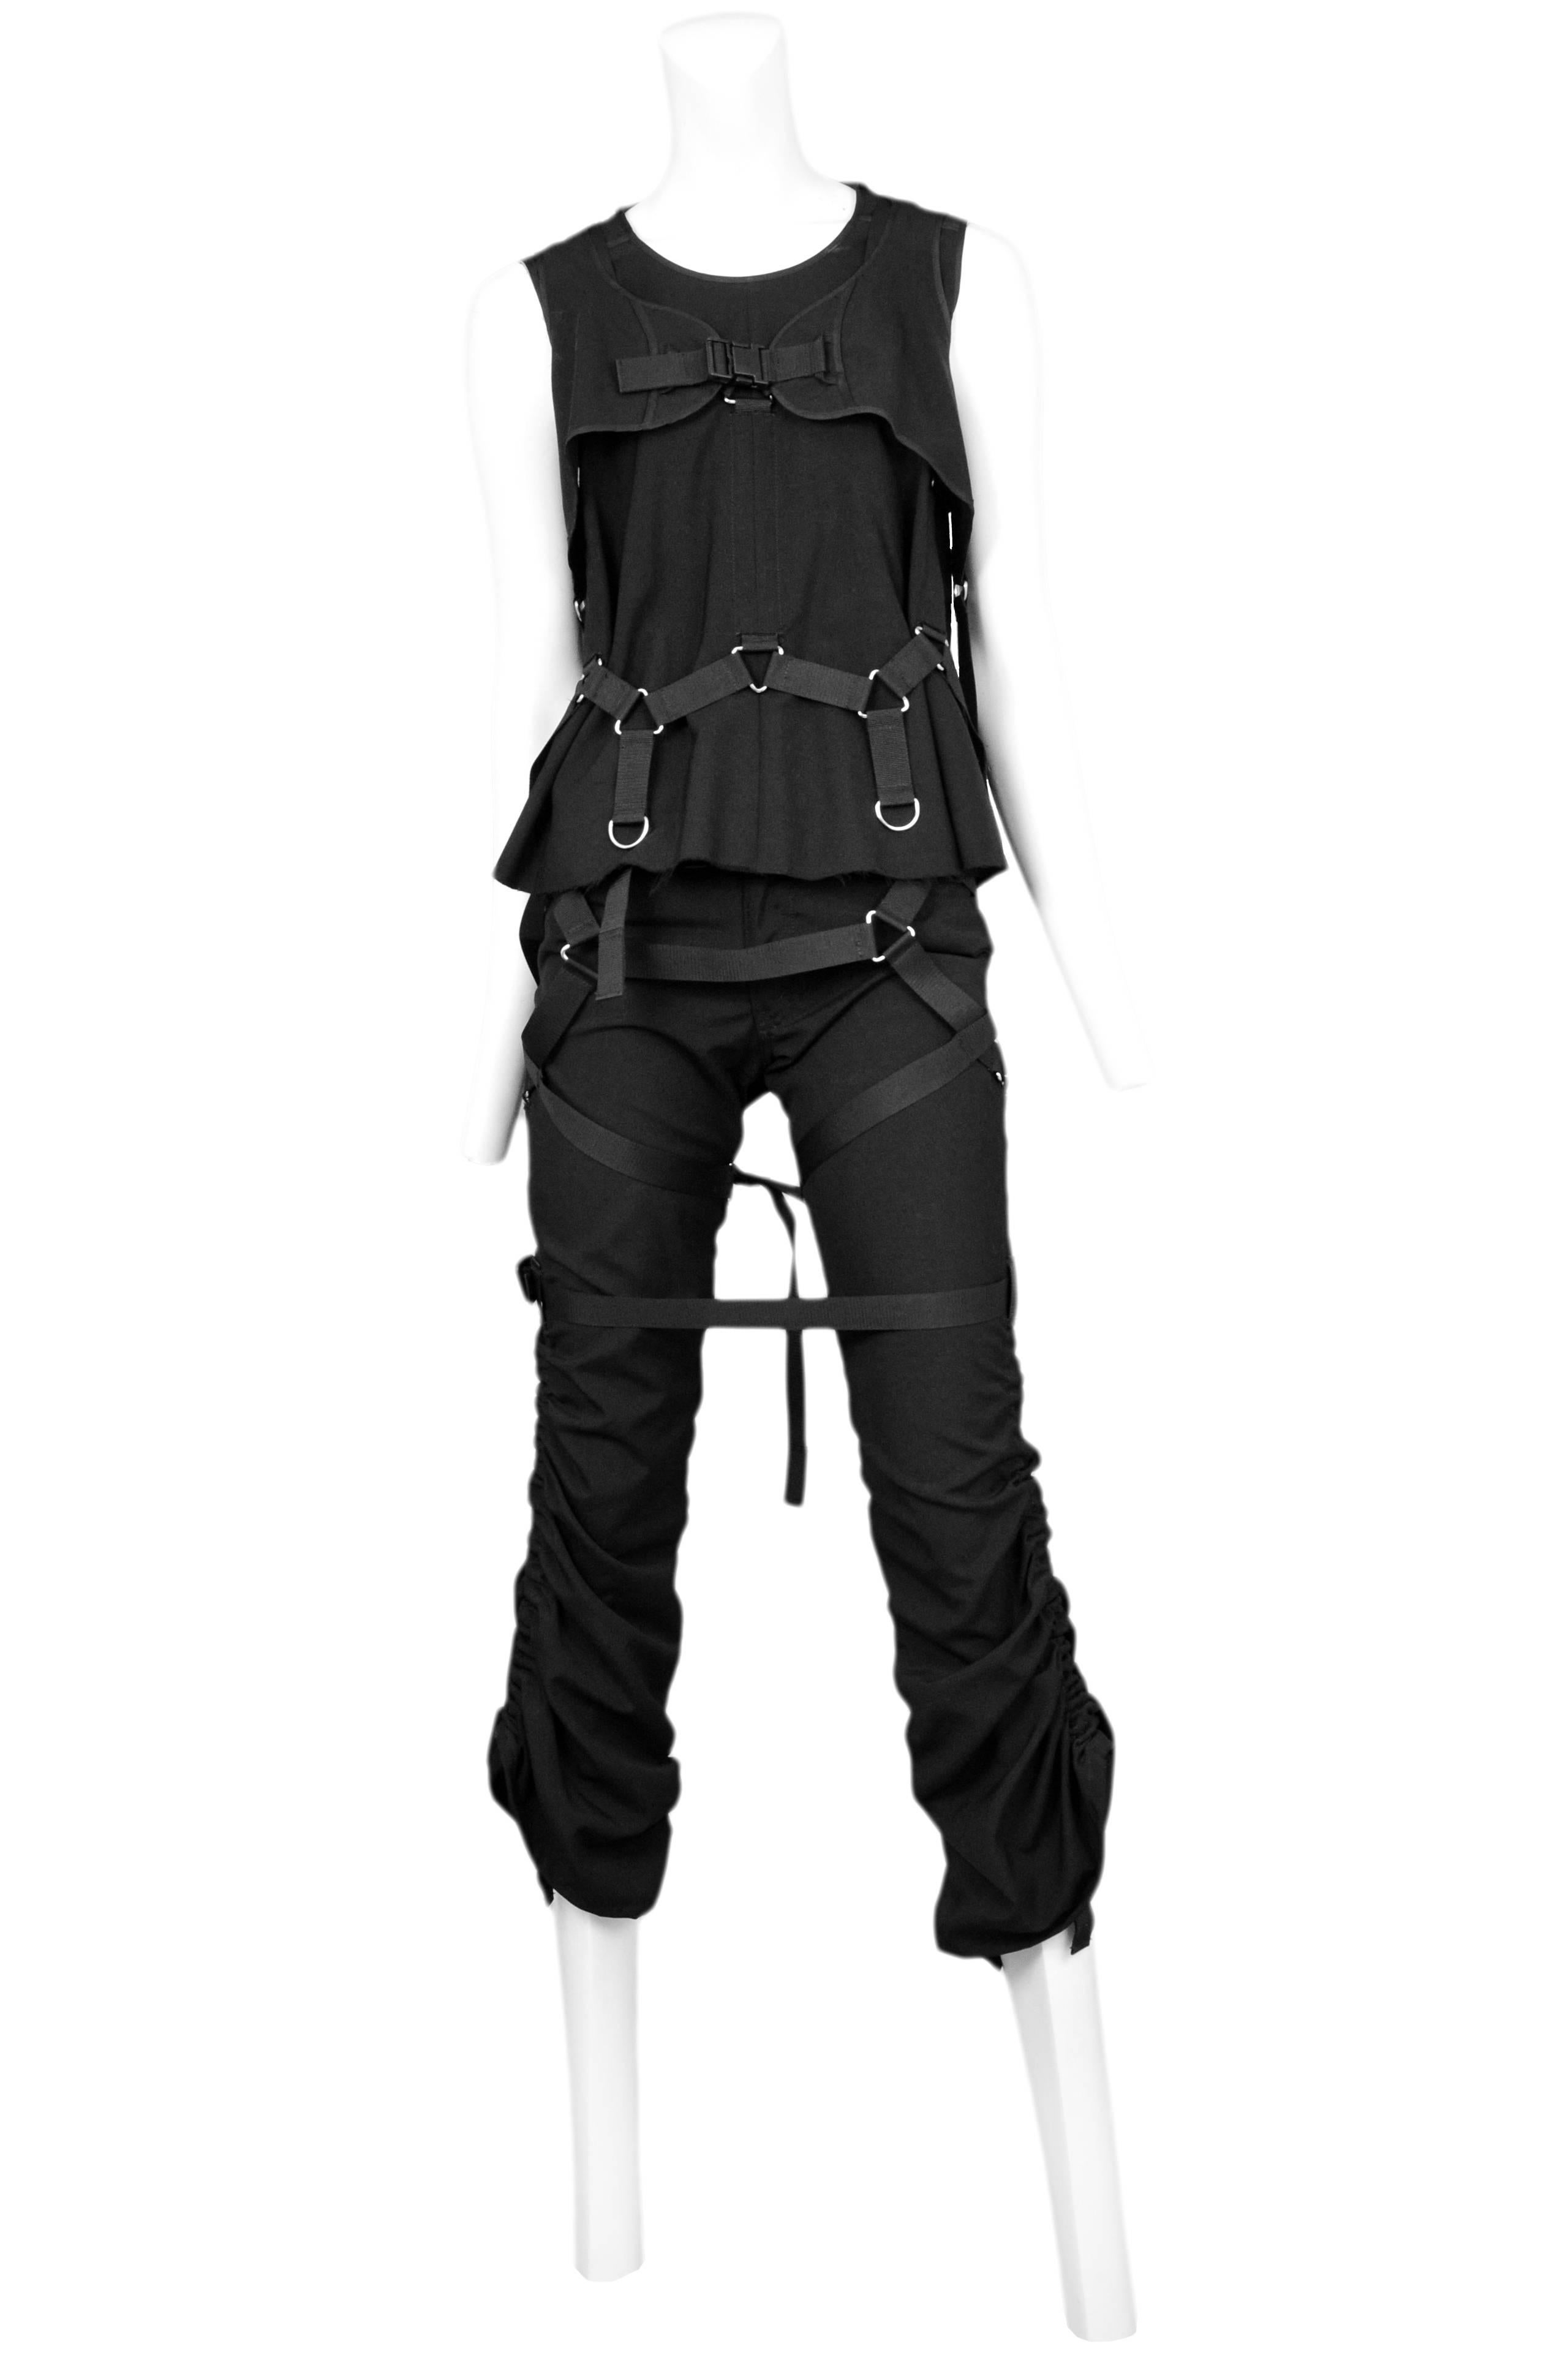 Vintage Junya Watanabe black parachute ensemble featuring a black sleeveless tank with black parachute straps and matching black pants that gather up the sides. Circa 2003.
Please inquire for additional images.